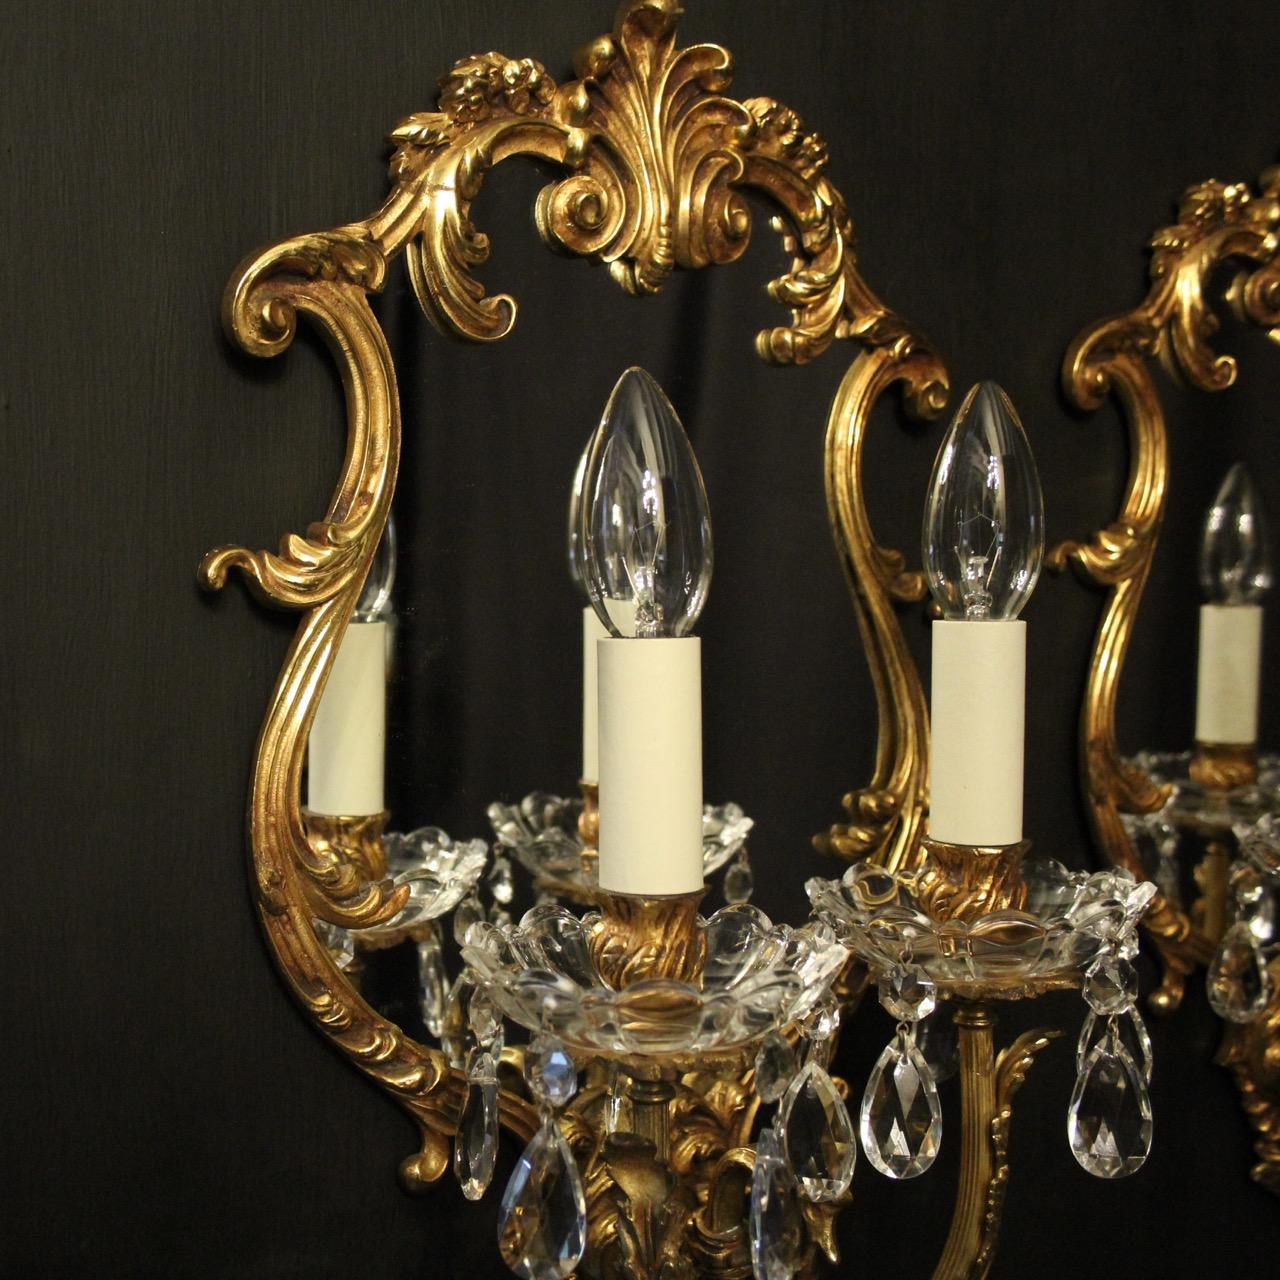 An ornate Italian pair of gilded bronze twin arm antique girandoles, the reeded scrolling arms with leaf glass bobeche drip pans and bulbous candle sconces, issuing from an ornately cast cartouche shaped mirrored backplate with central leaf motif,